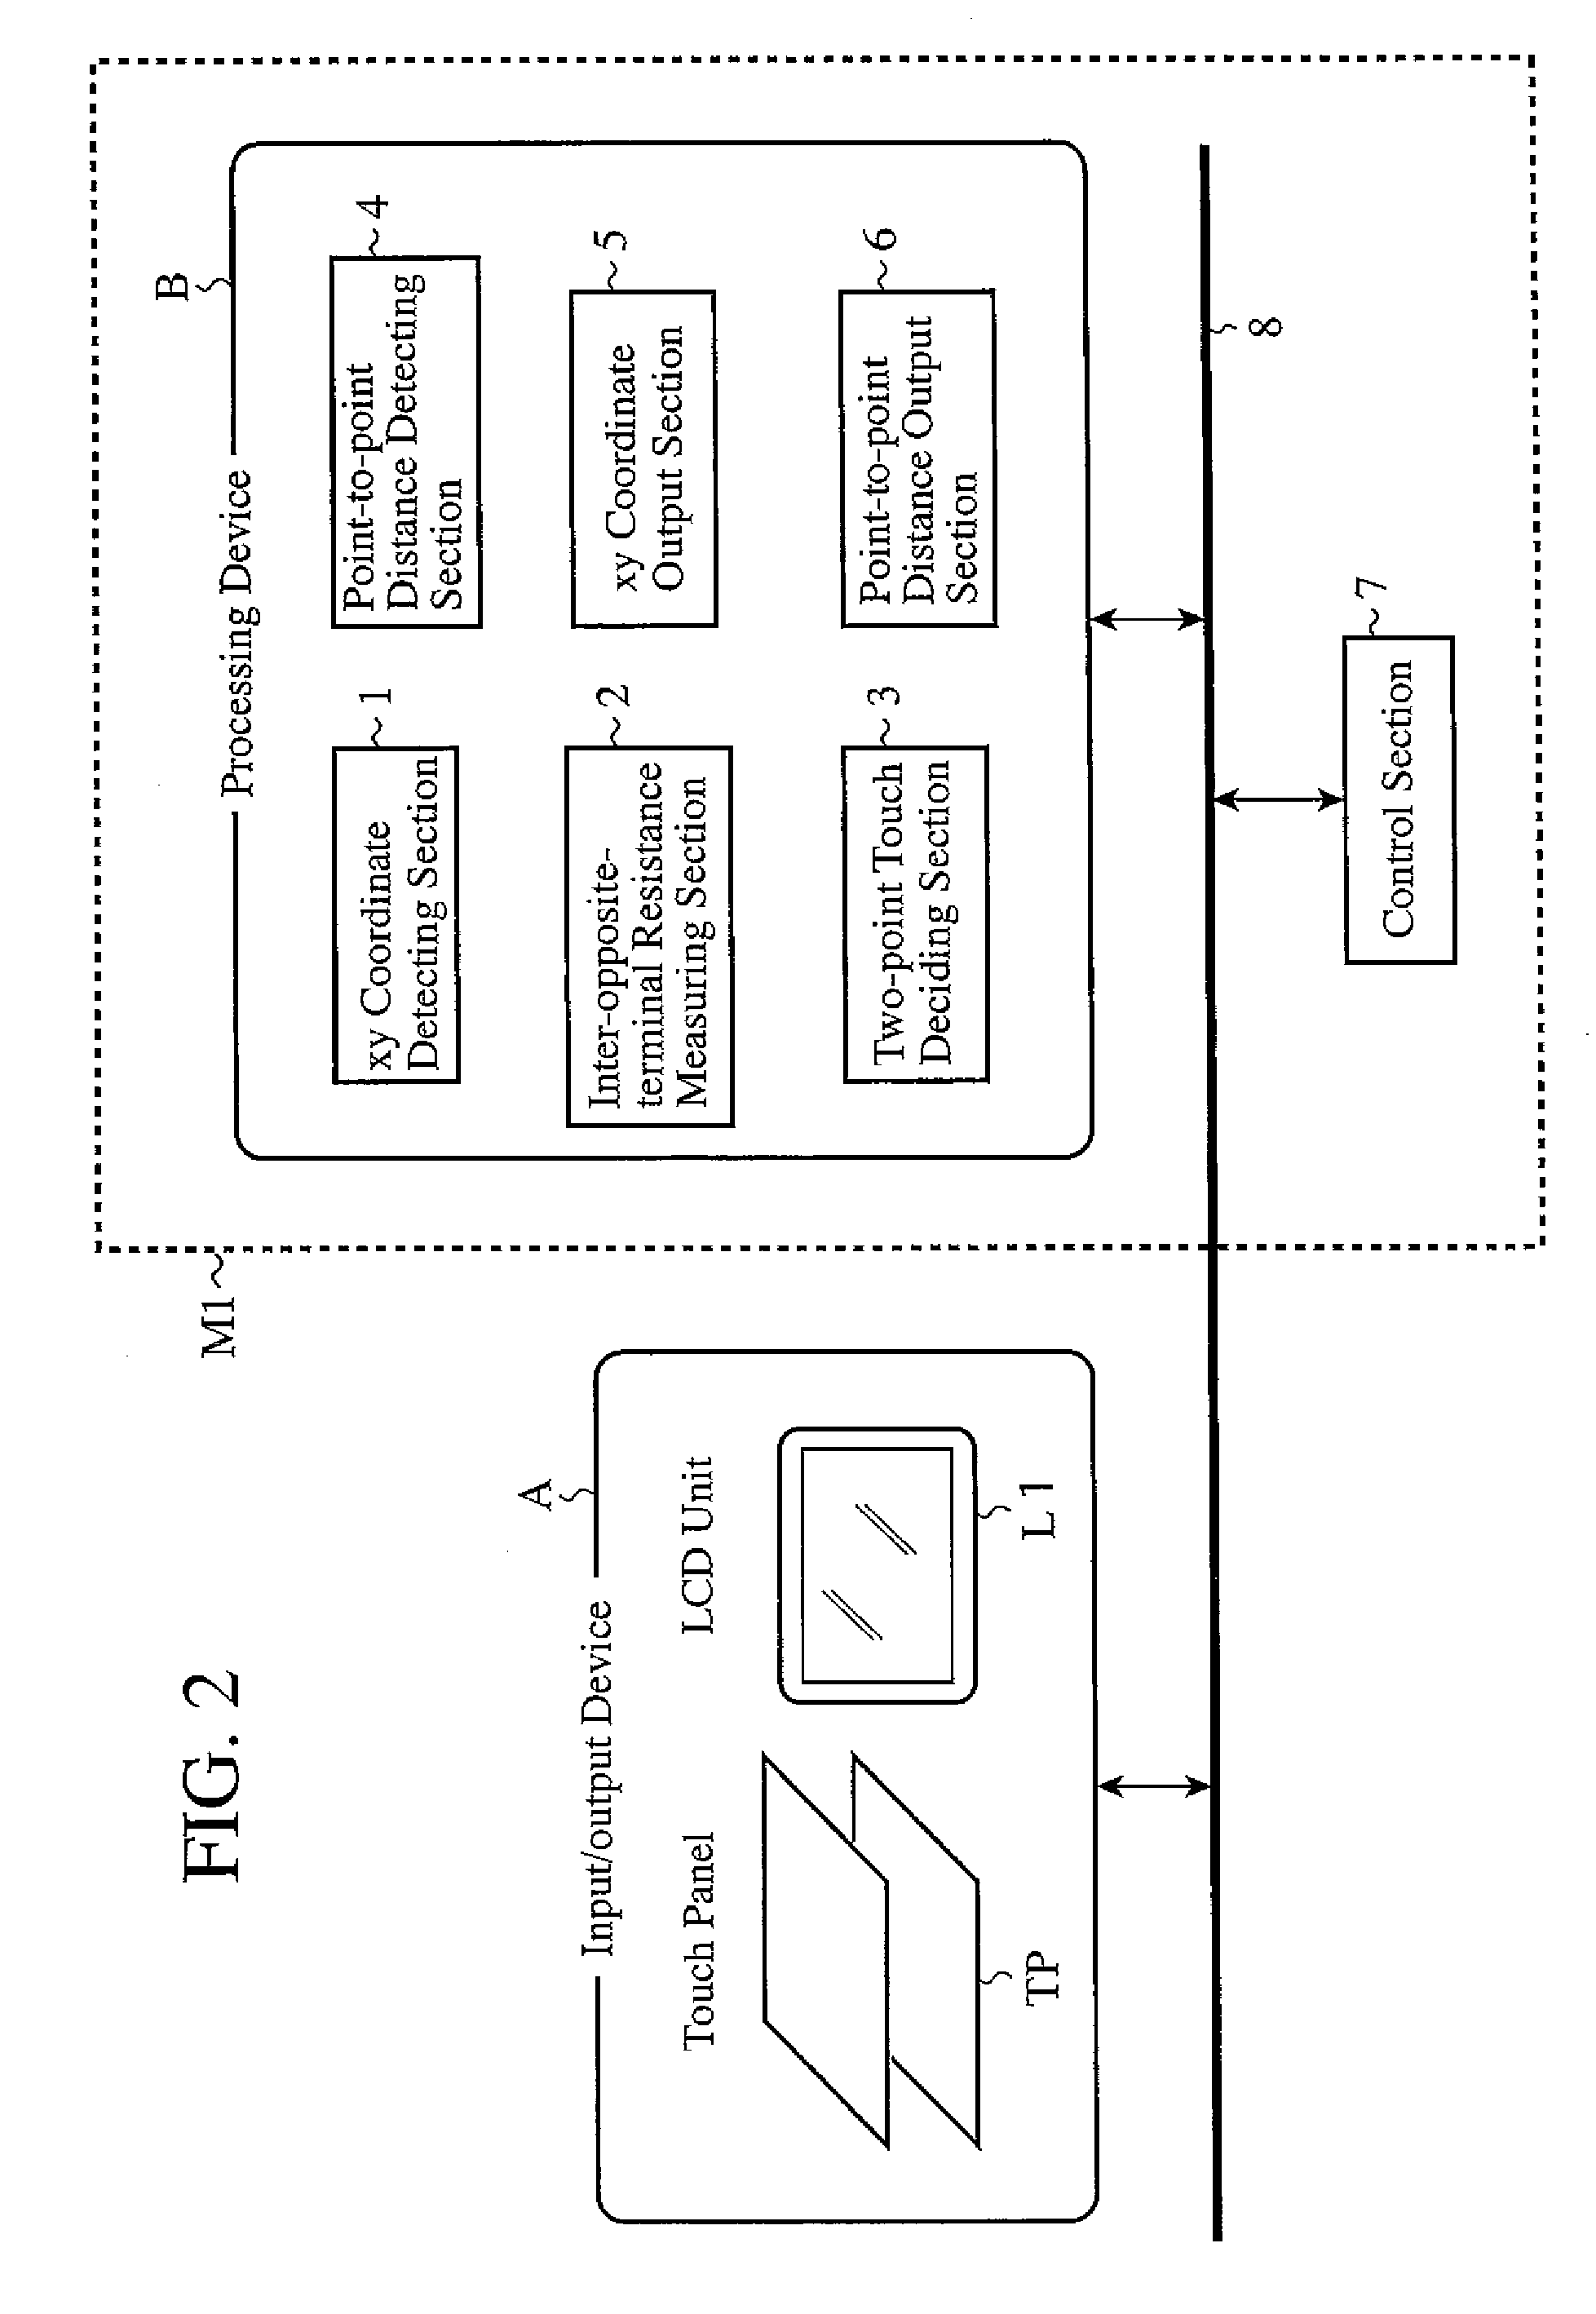 Touch panel device and user interface device